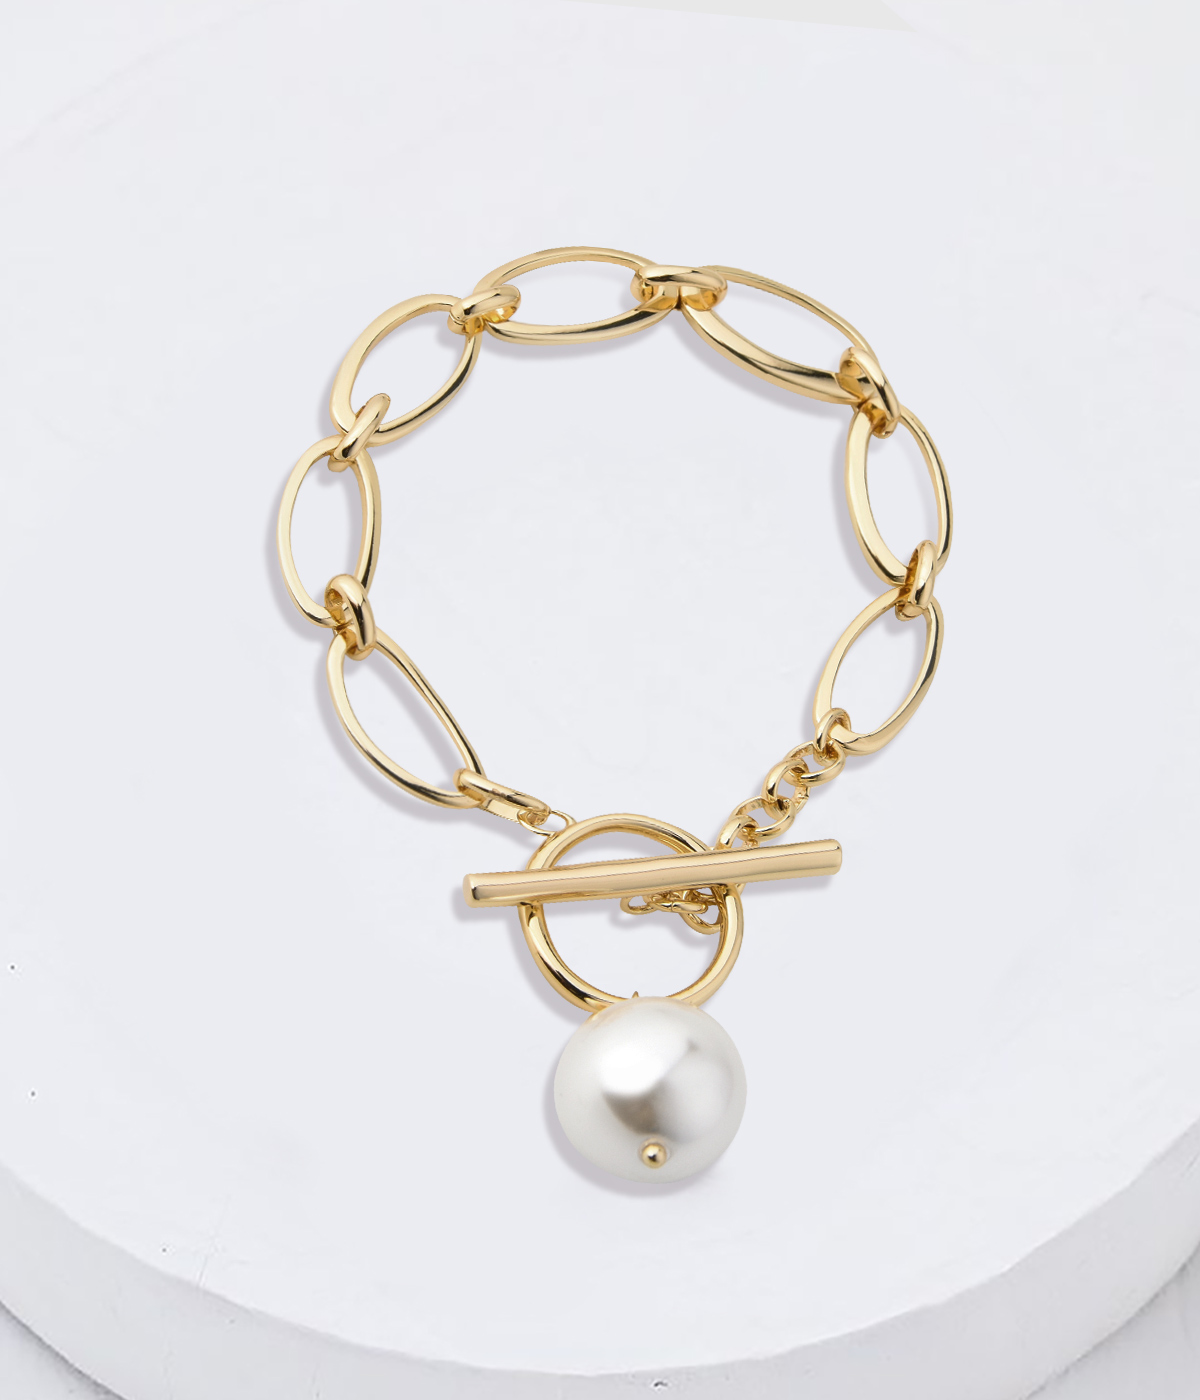 Big Chain and Pearl Collection -latest BRACELET,Chain design 2021